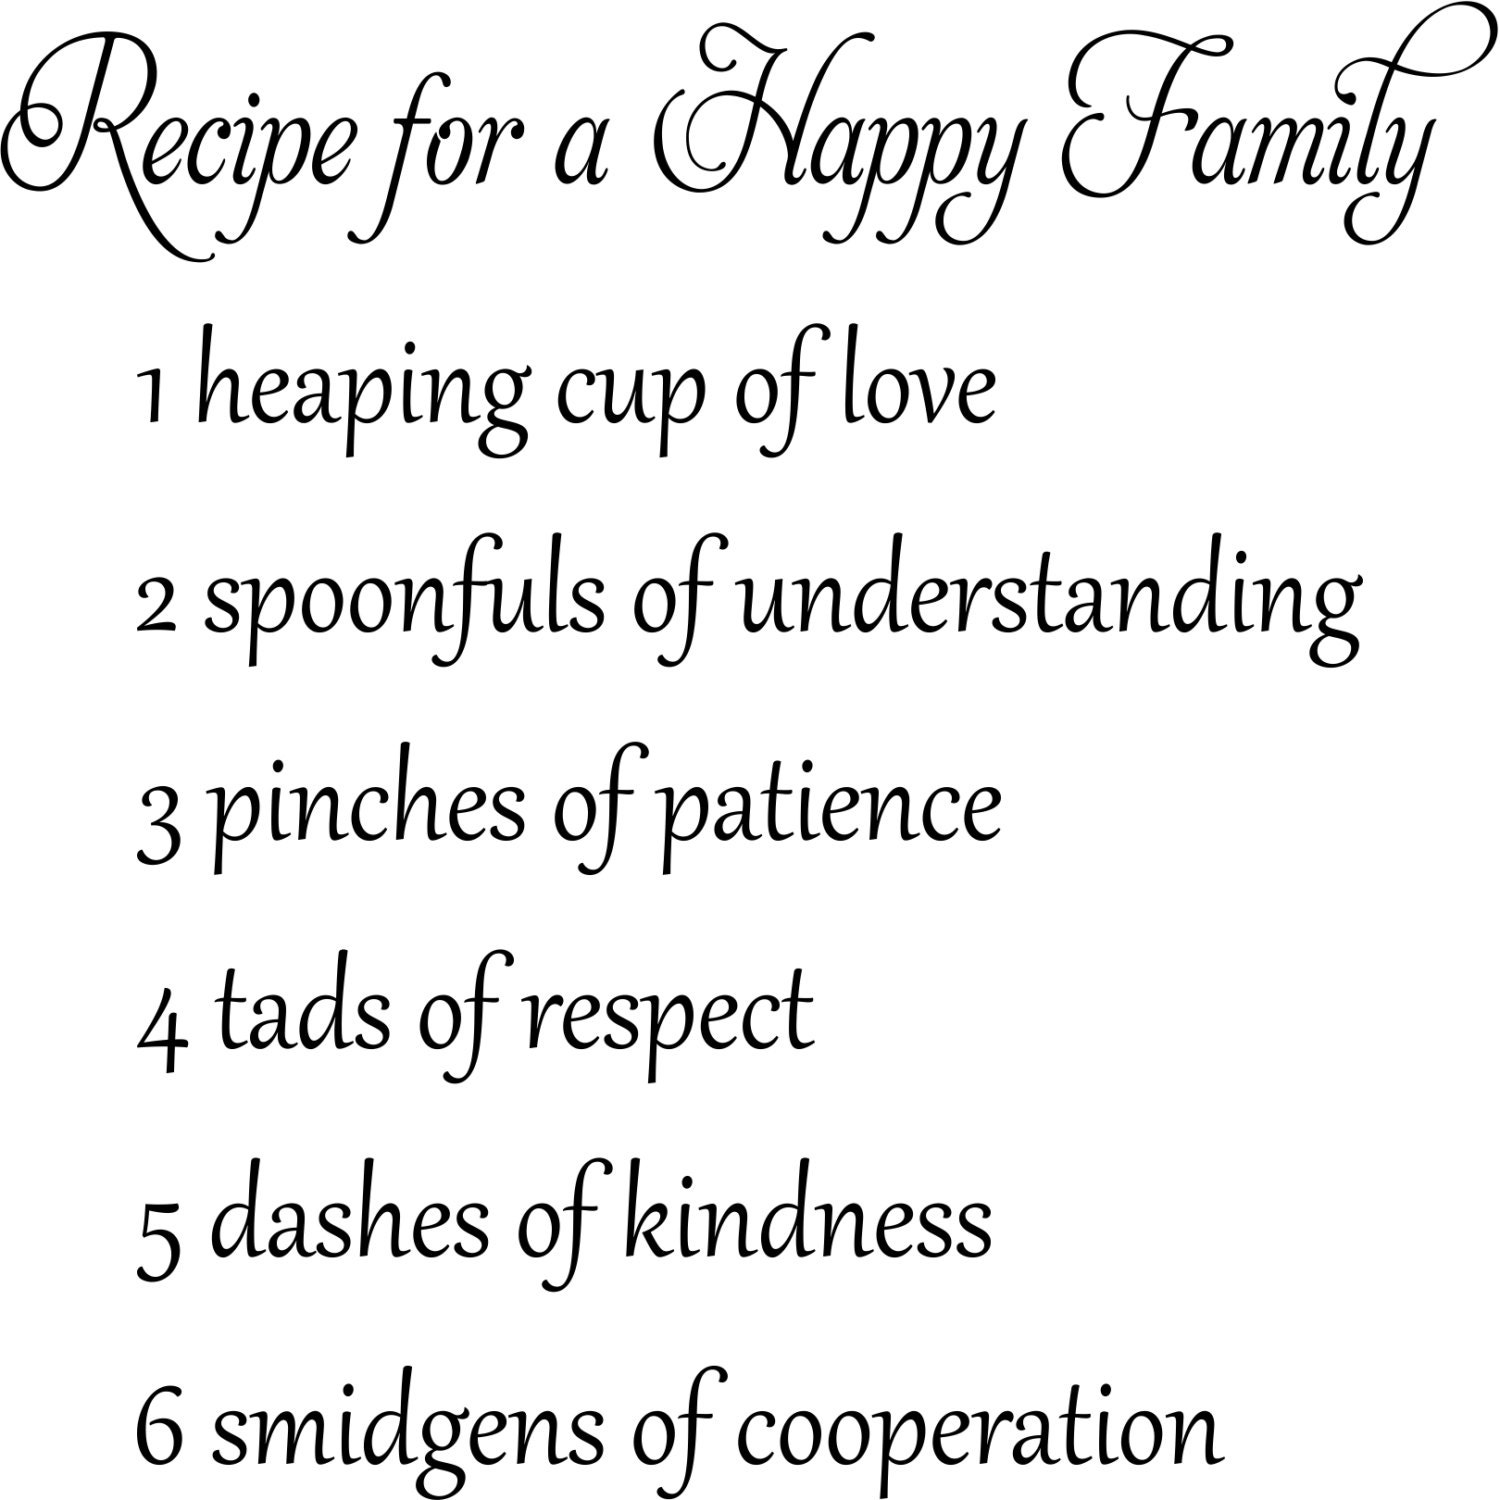 Download Kitchen Wall Decal Recipe for a Happy Family Kitchen Wall